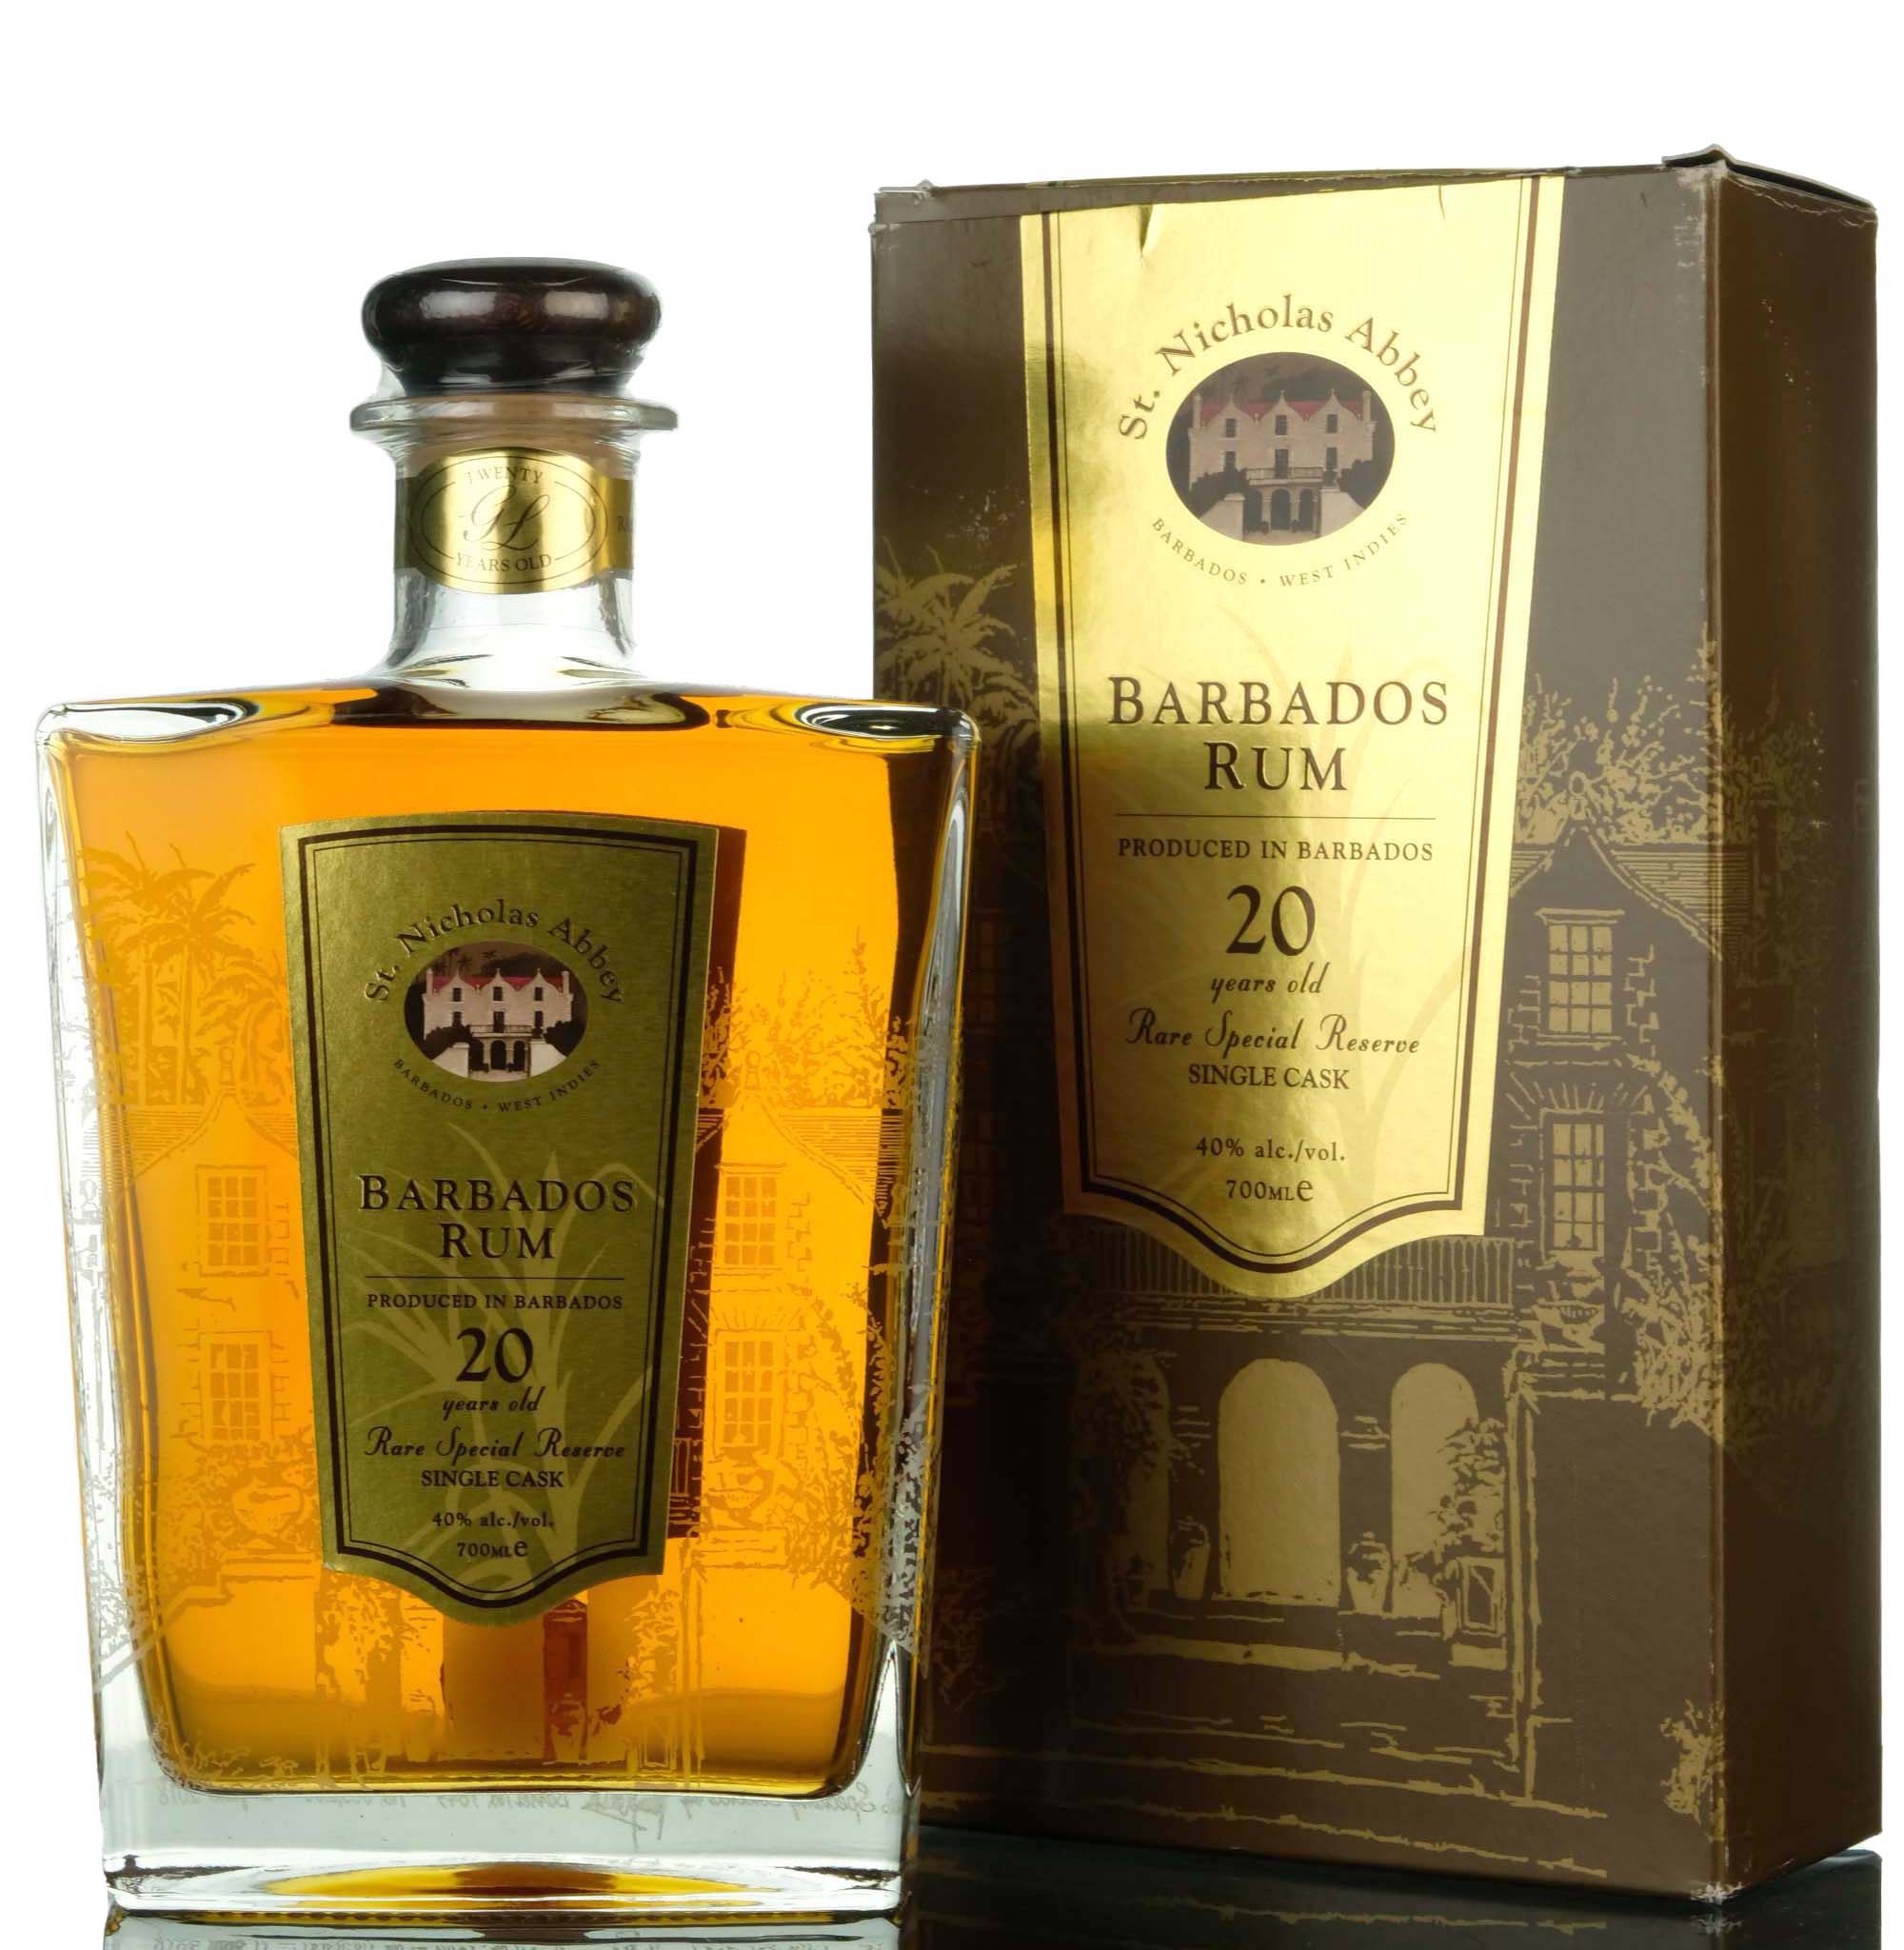 St. Nicholas Abbey 20 Year Old - Barbados Single Cask Rum 1659 - 2018 Release